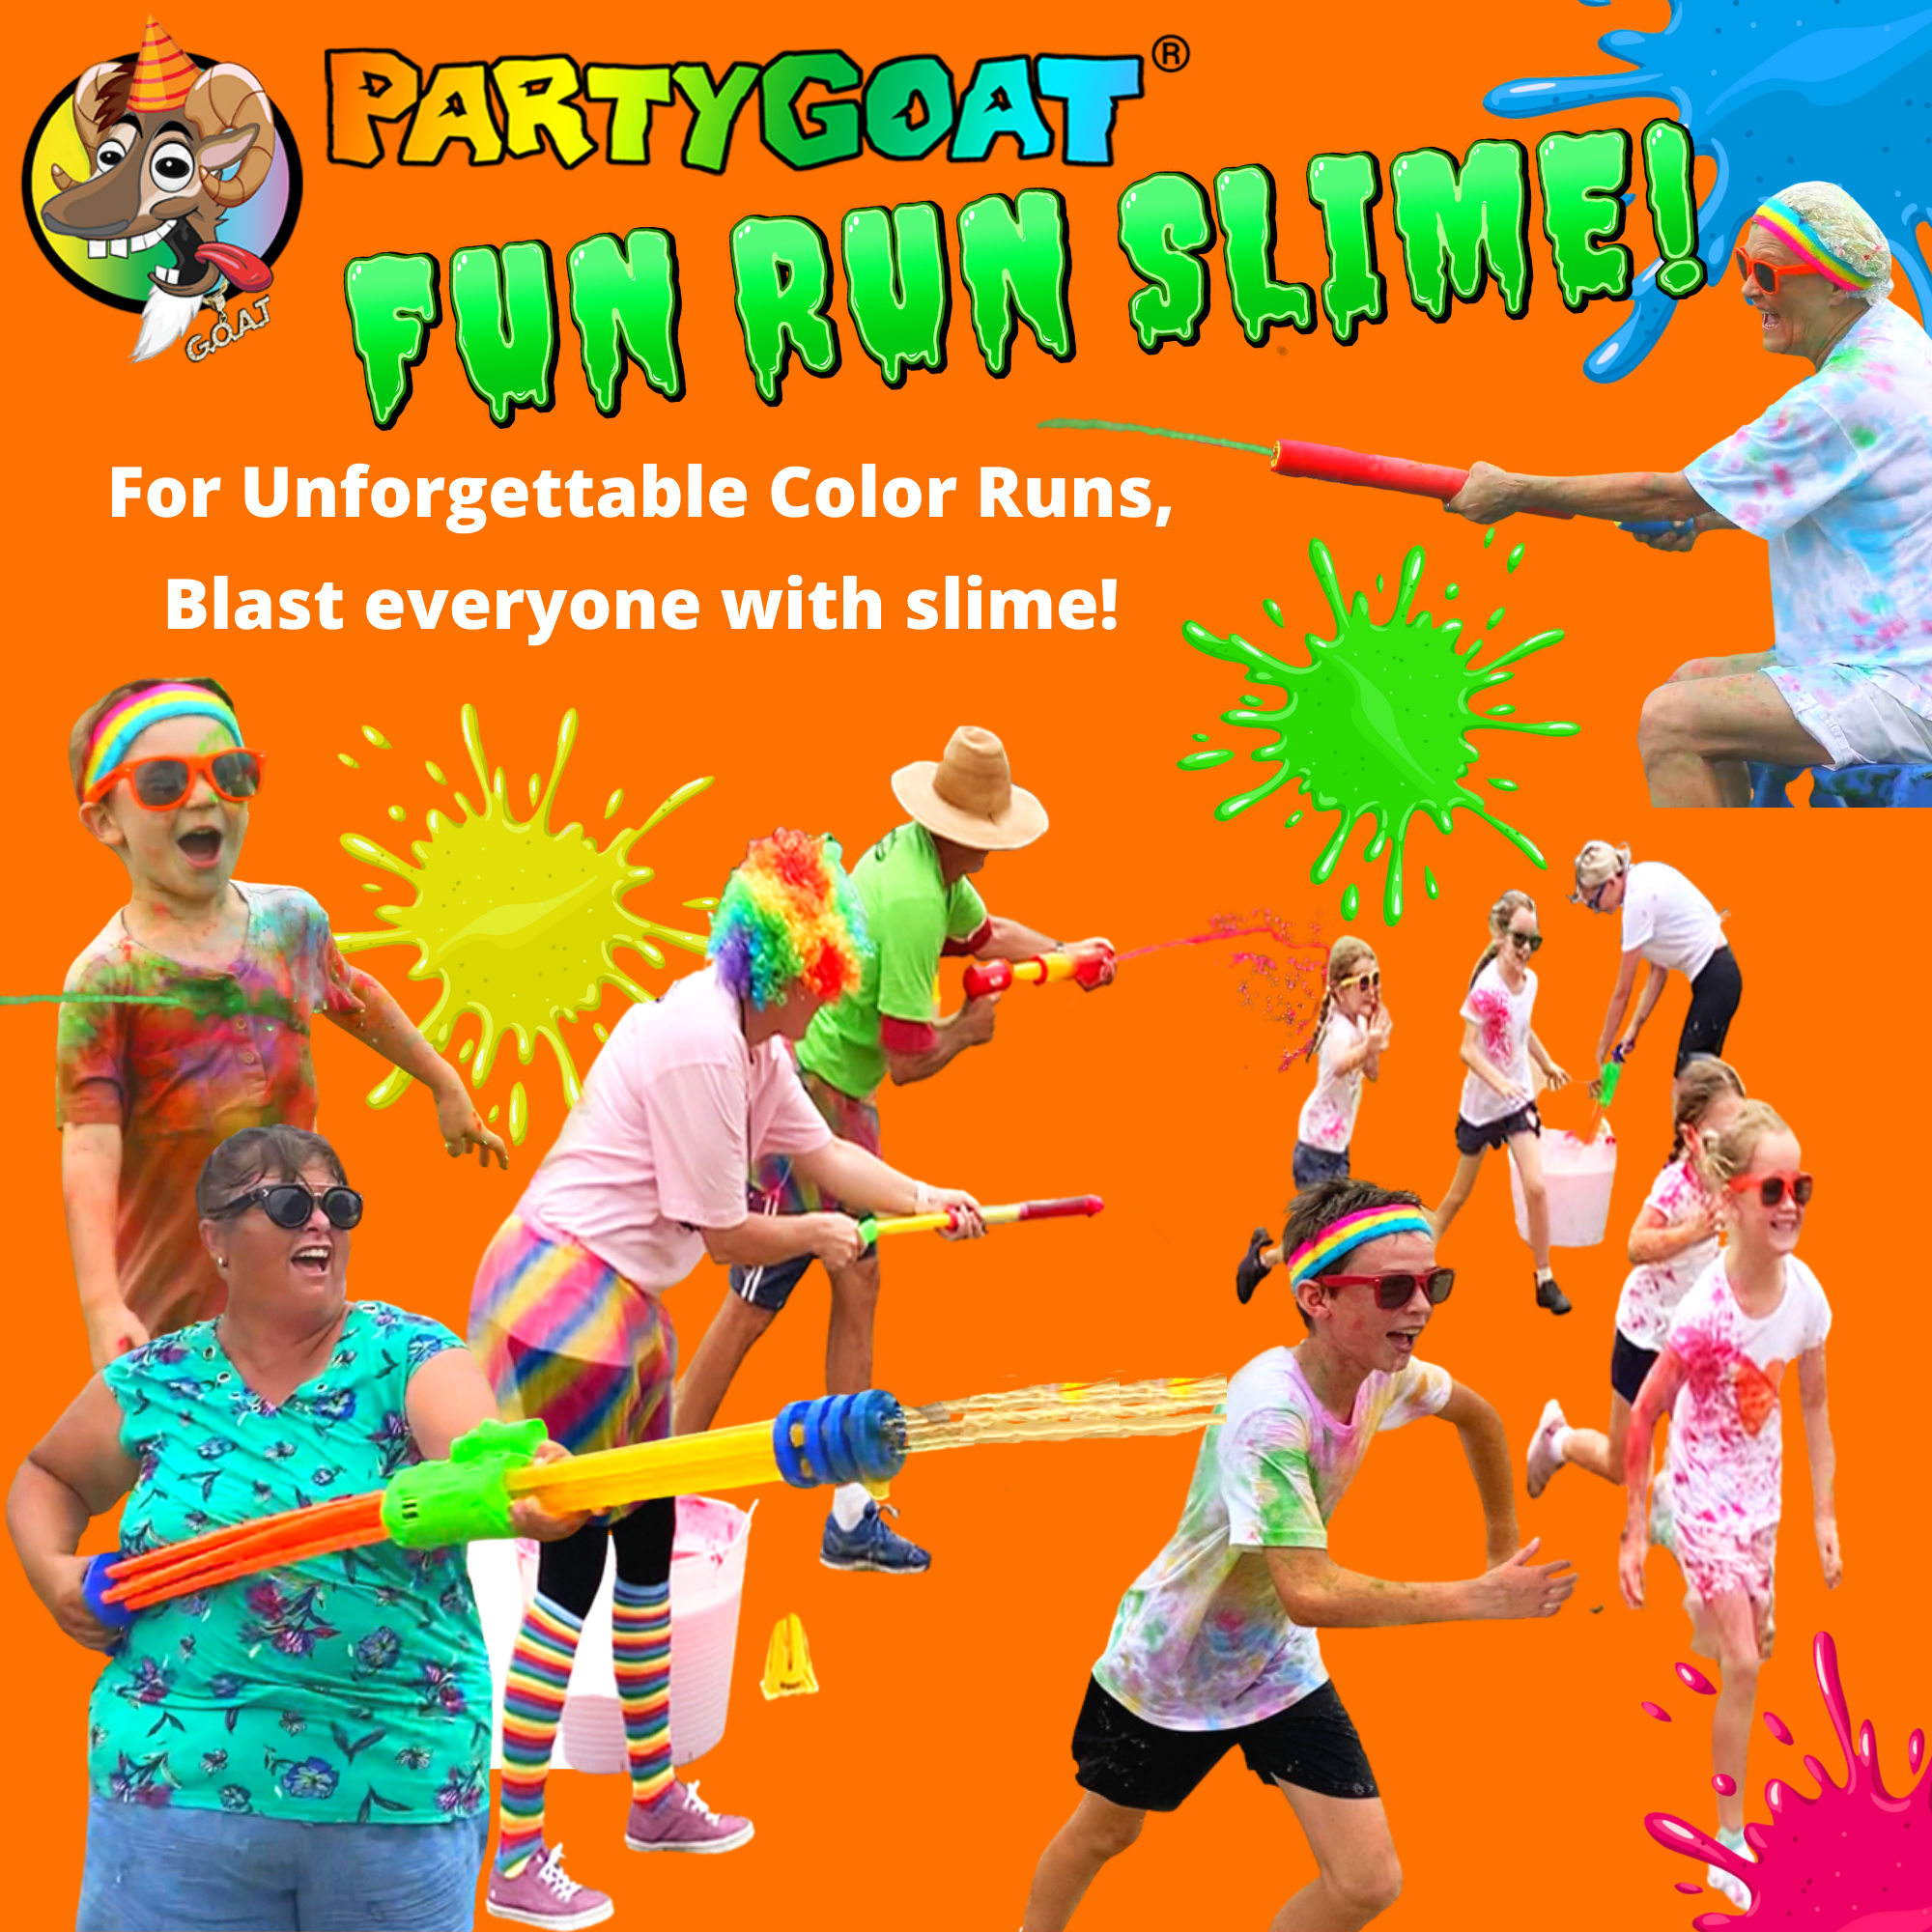 FUN RUN SLIME - 4 colors of Instant Slime for the best color runs